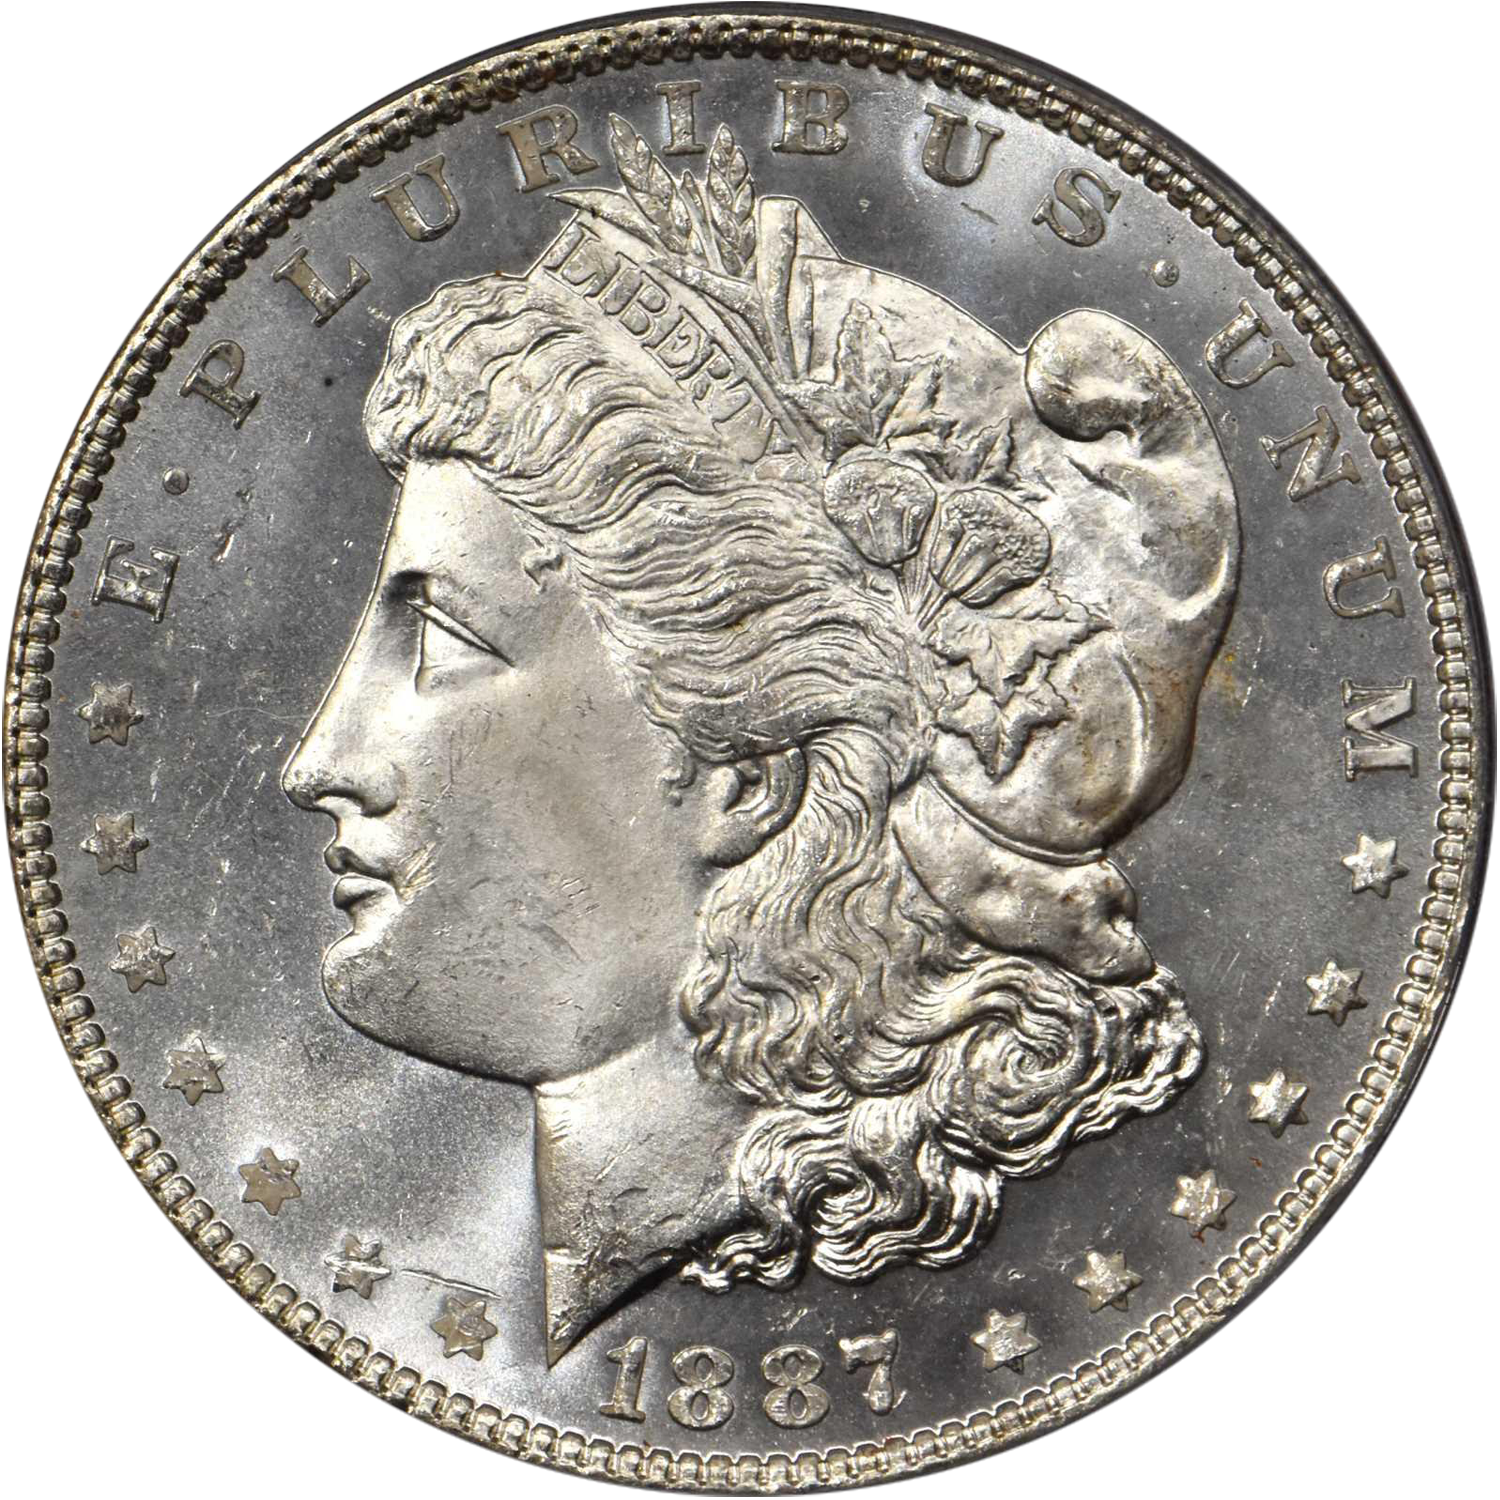 1887 p overdate on 1886 morgan dollar value guide